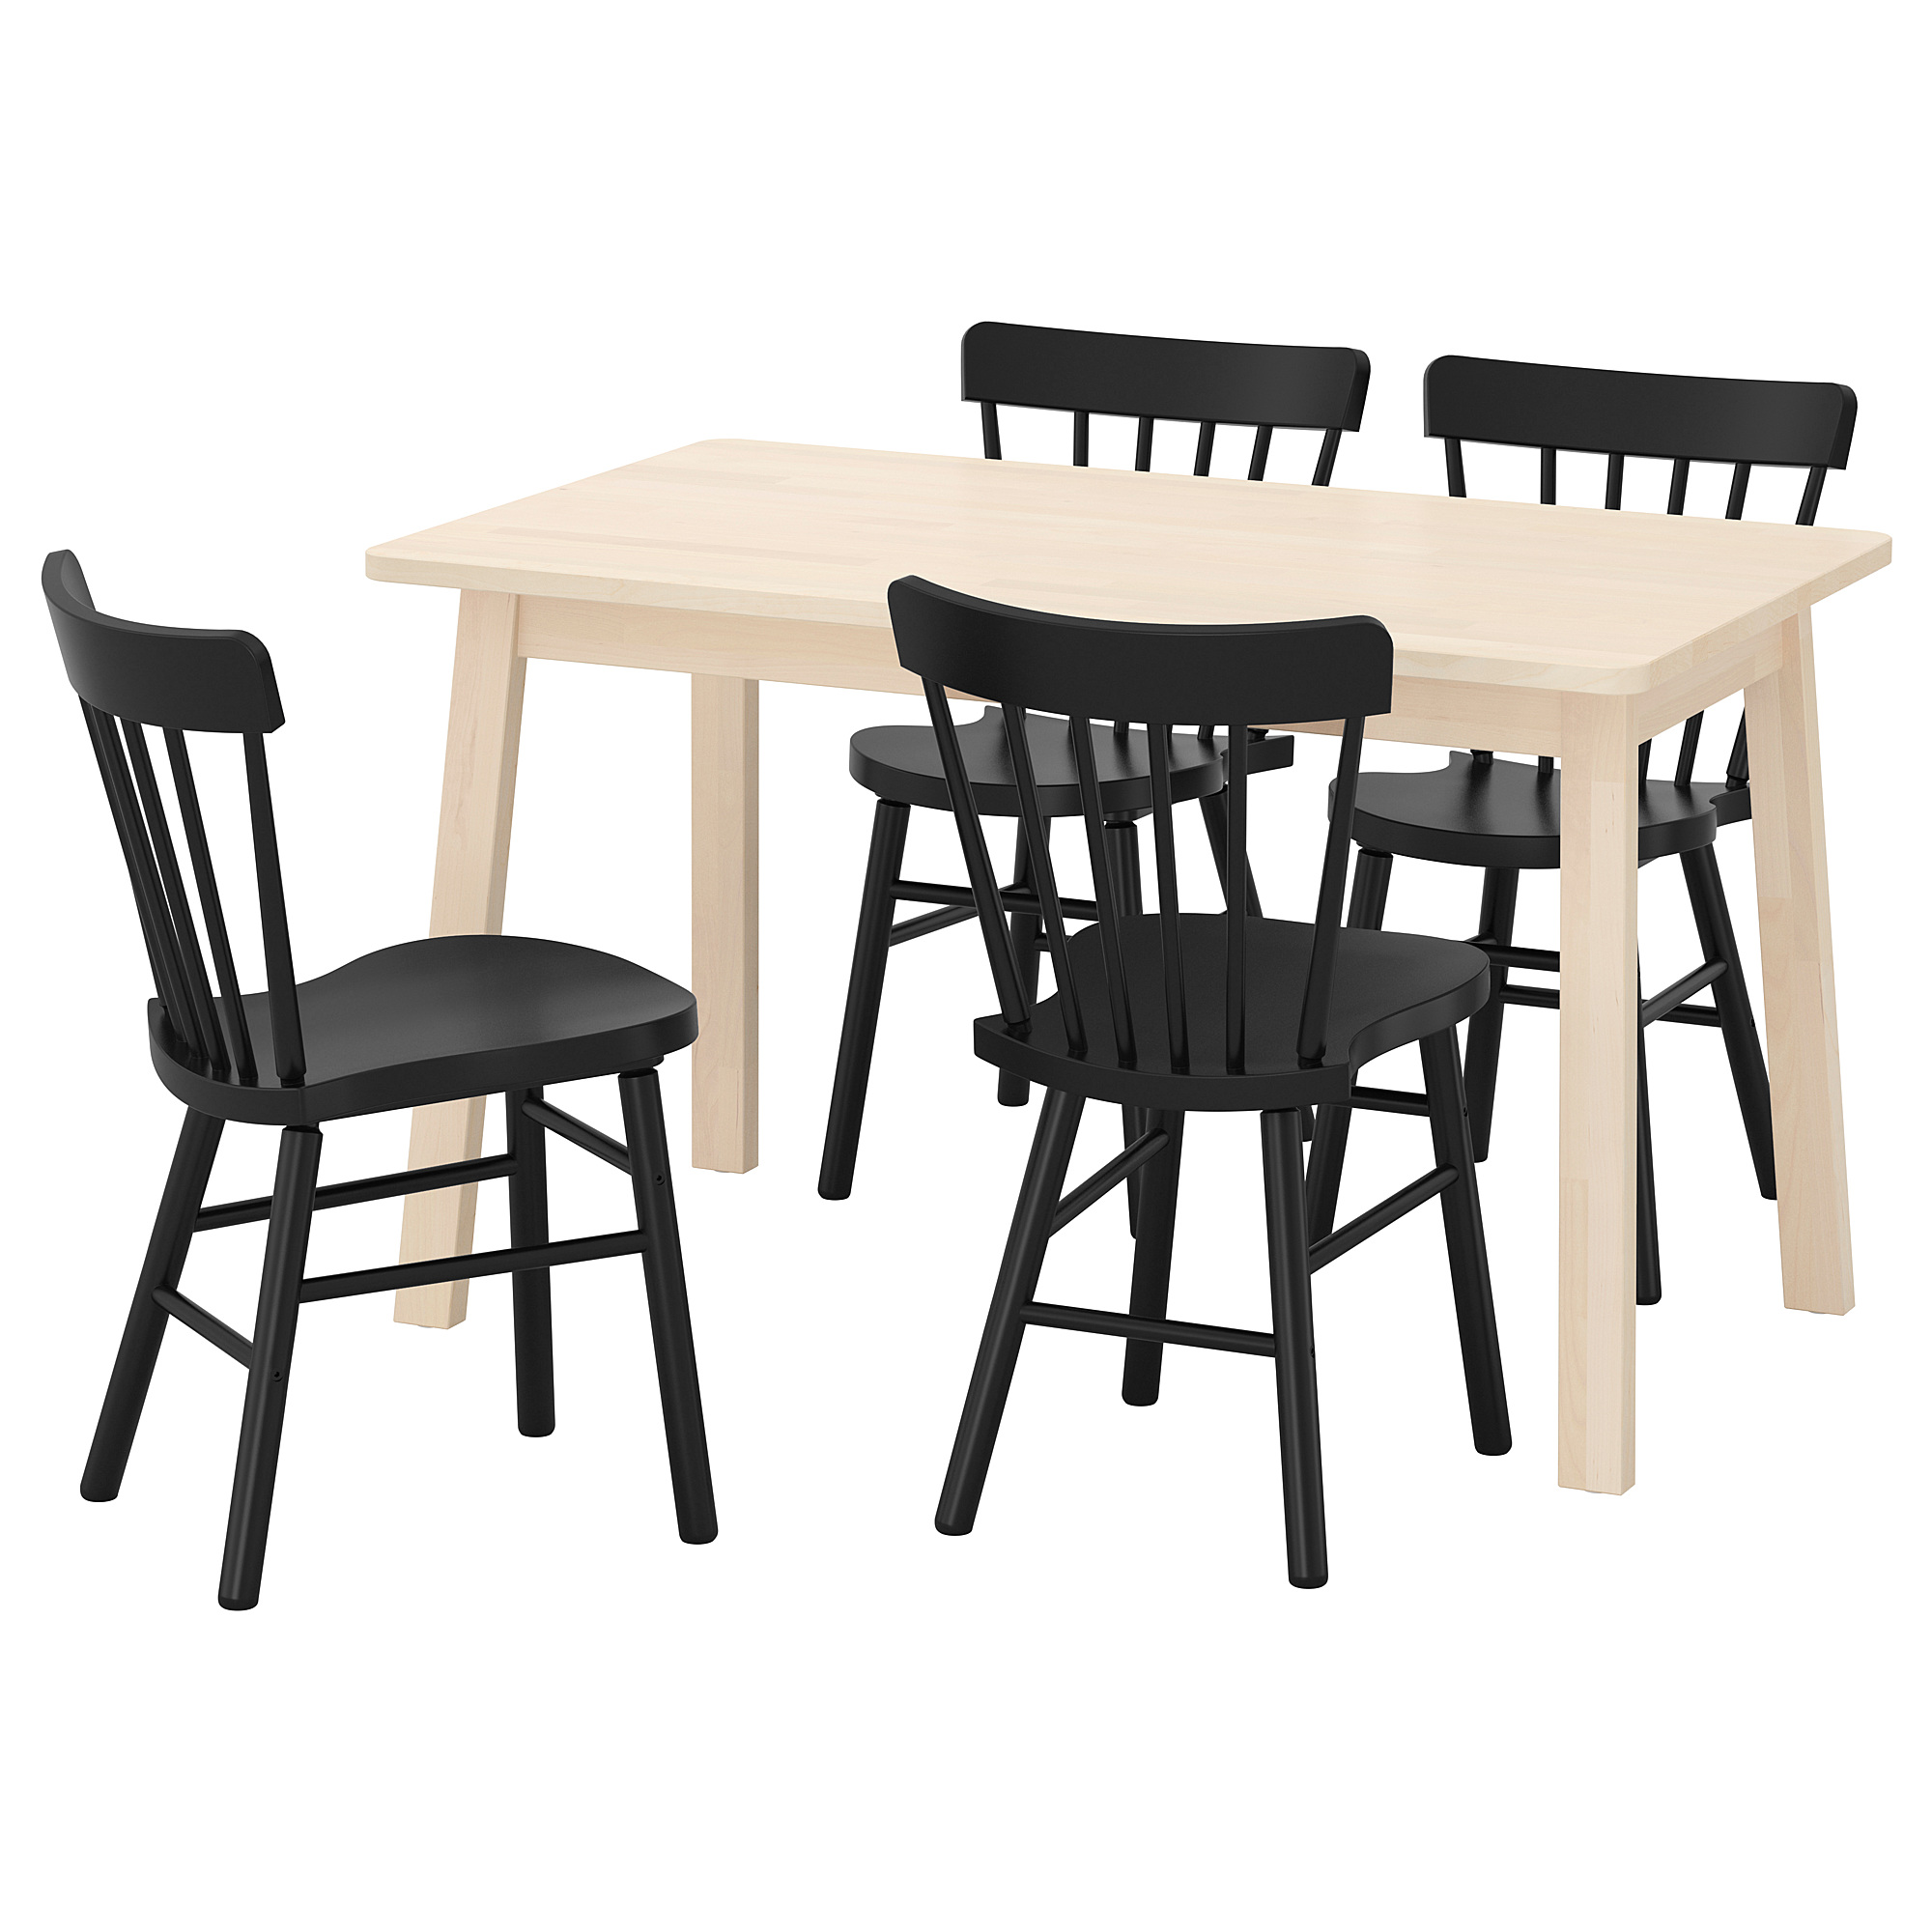 NORRÅKER/NORRARYD table and 4 chairs